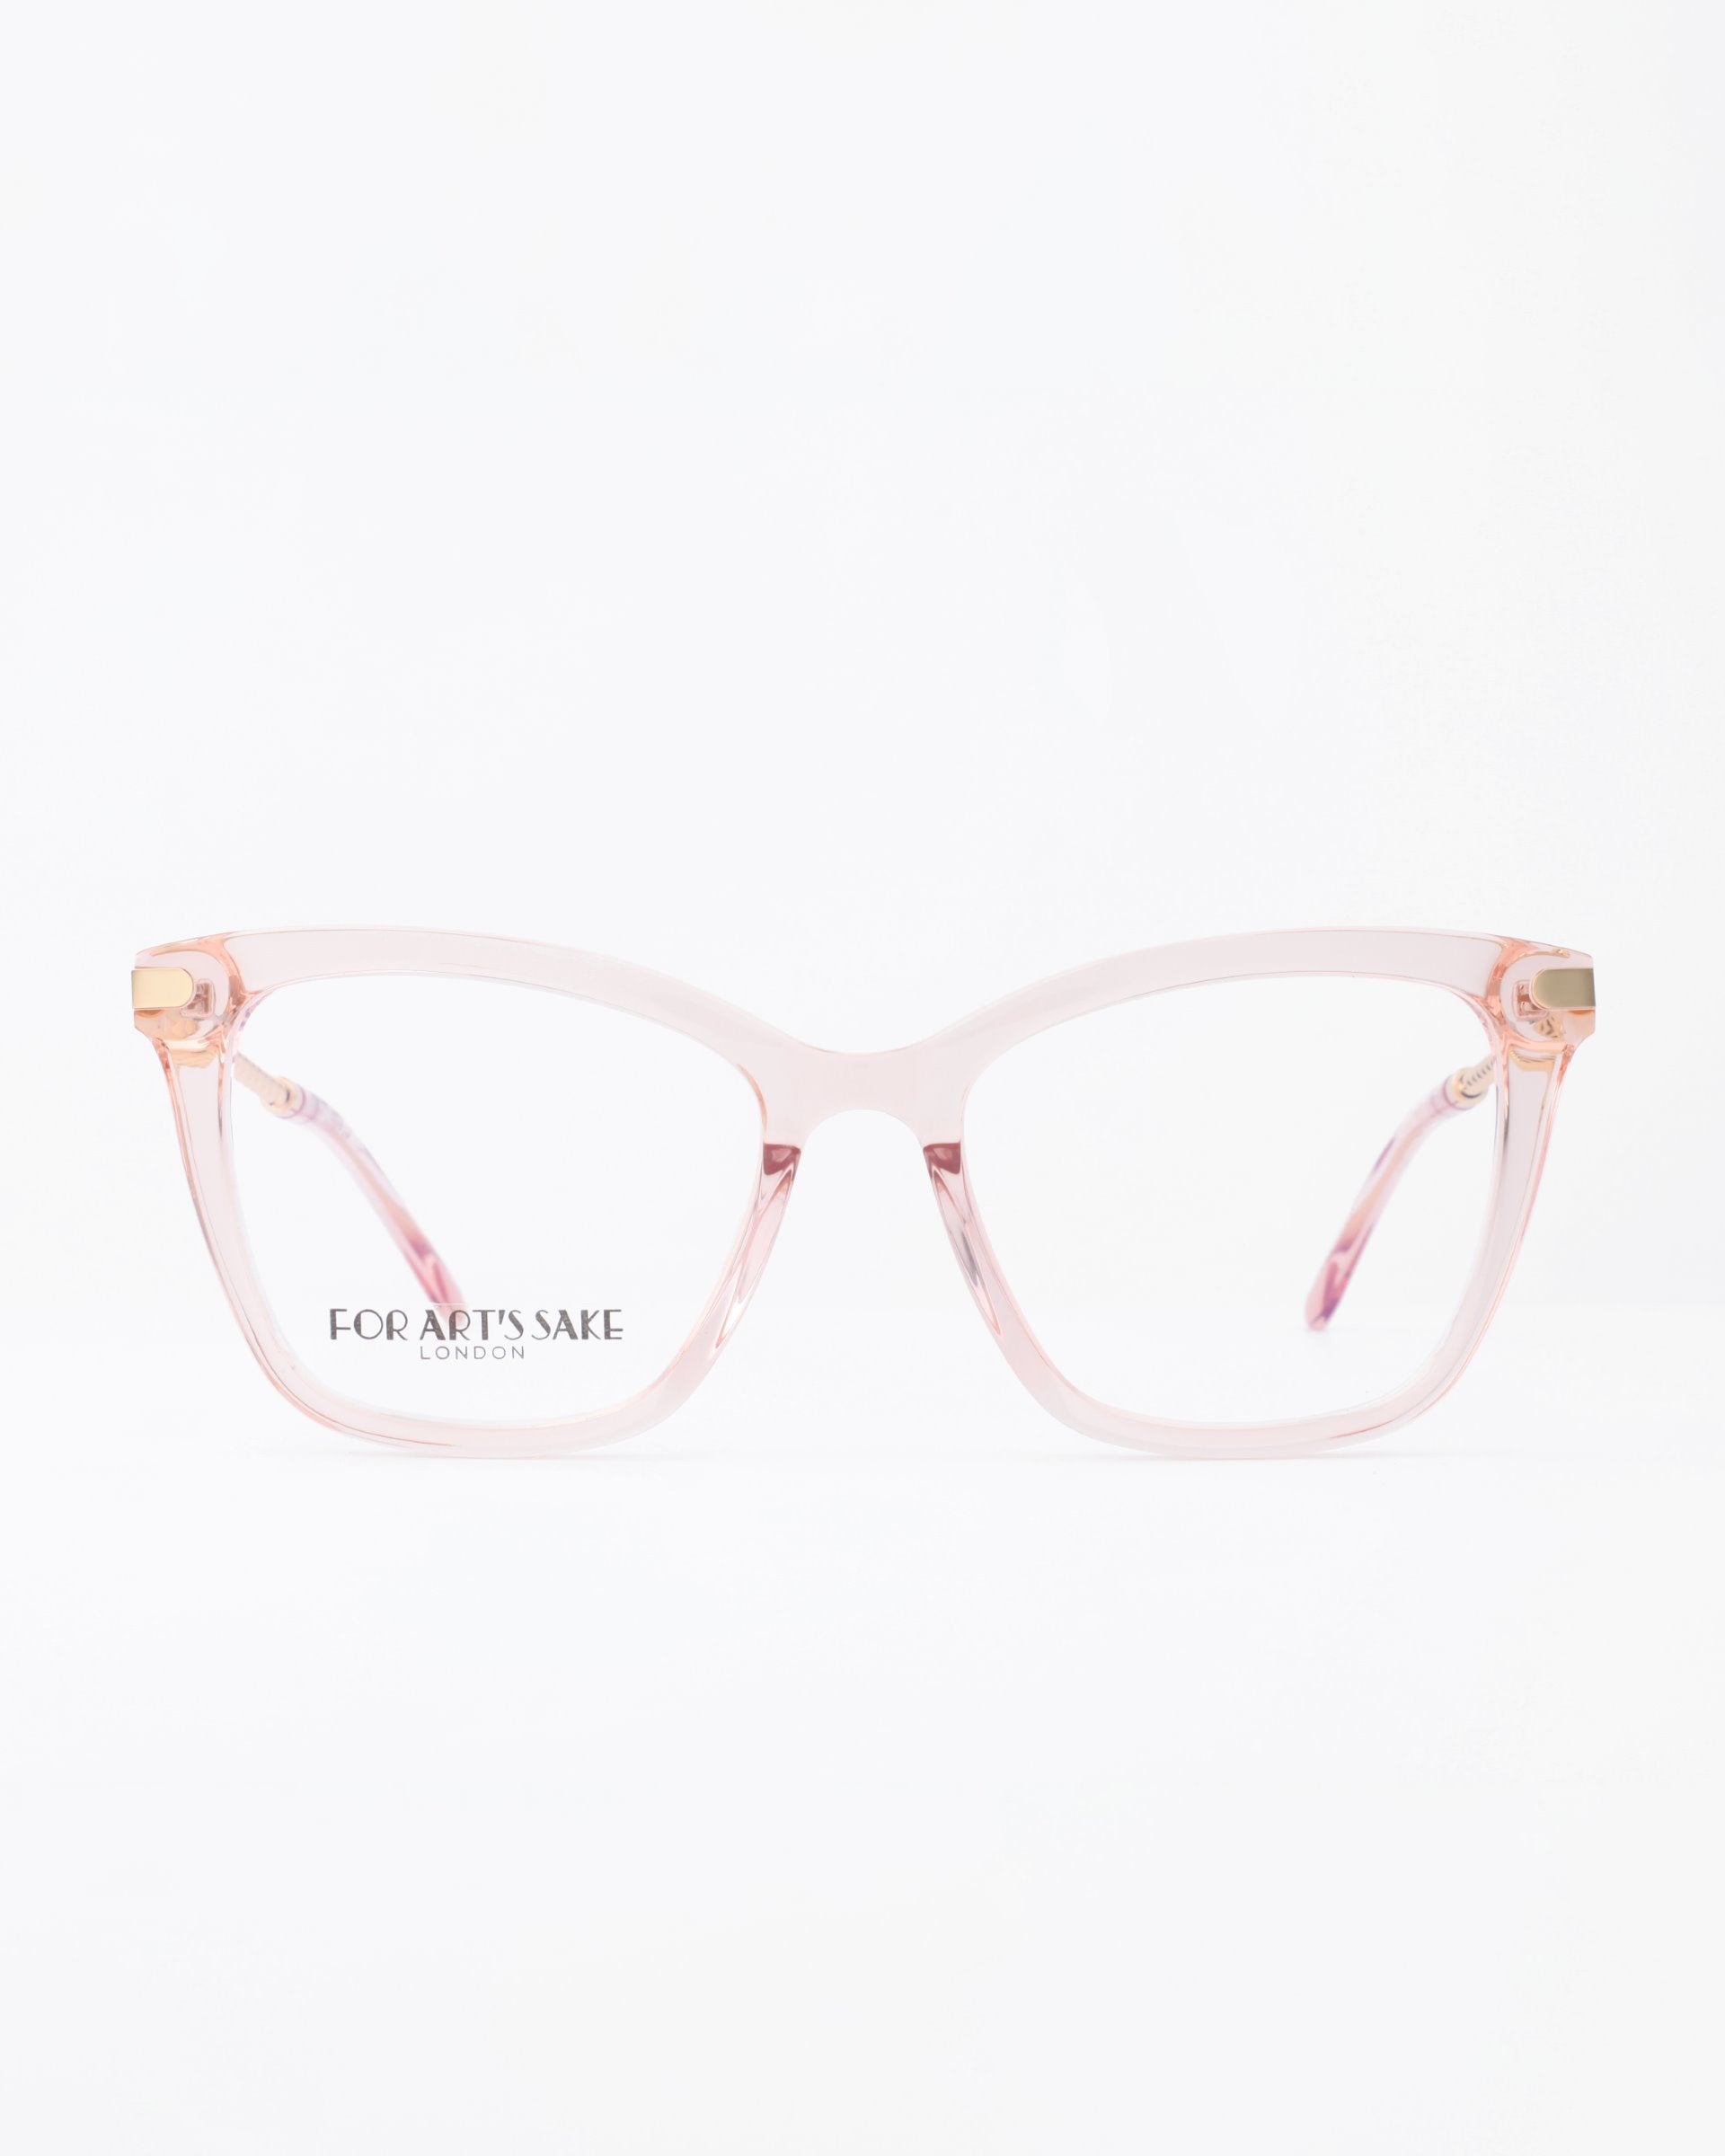 A pair of stylish, transparent pink eyeglasses with a slight cat-eye shape and gold accents on the hinges. The brand For Art&#39;s Sake® is printed on the left lens. Featuring blue light filter technology, they&#39;re perfect for modern lifestyles. The plain white background highlights the Paris Two eyeglasses beautifully.